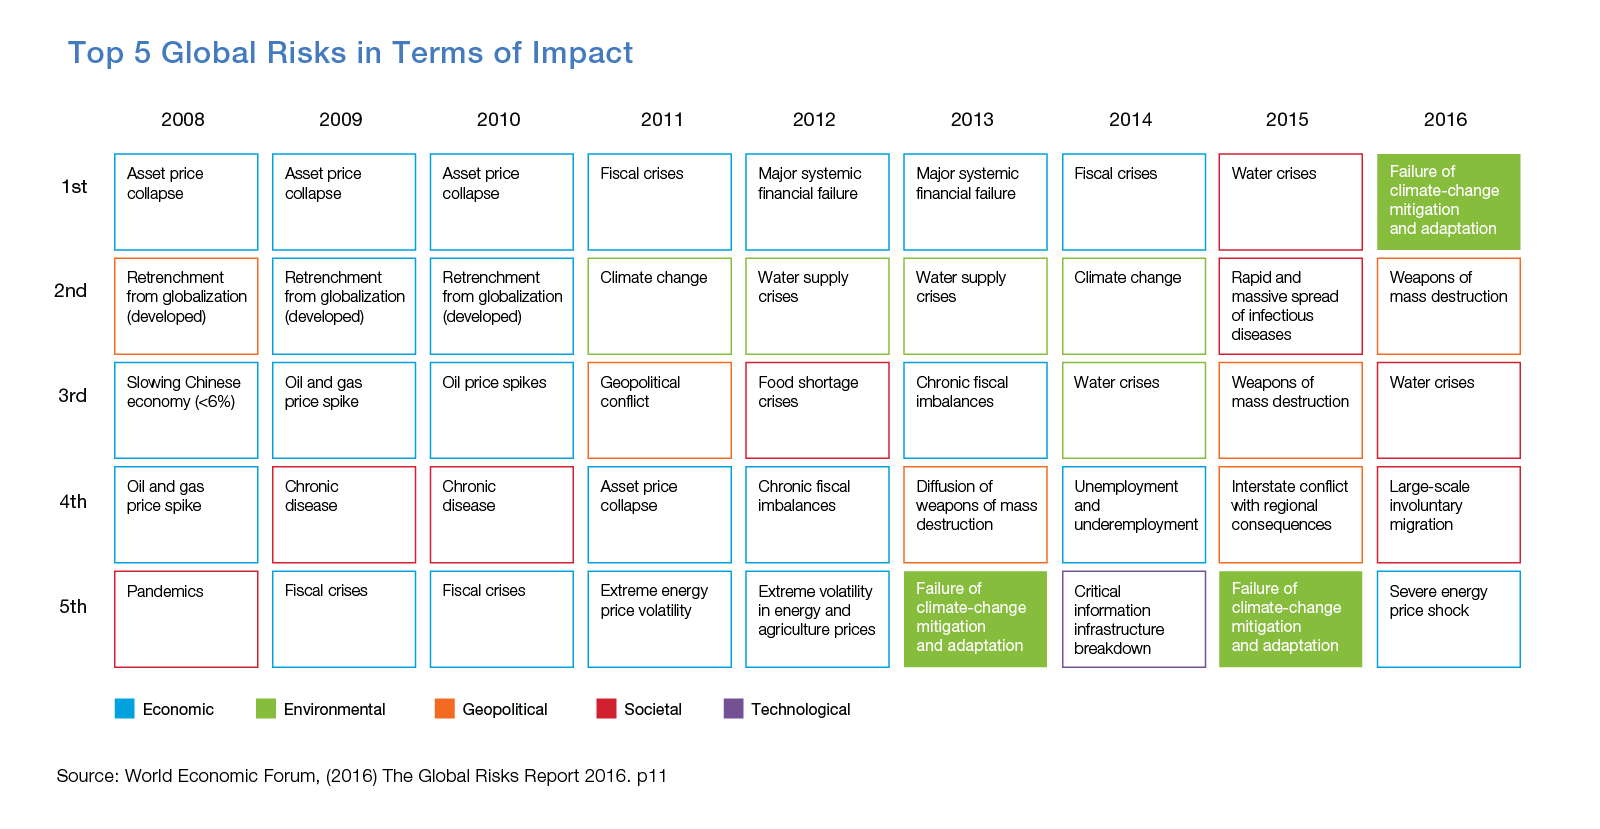 Table chart showing the top 5 global risks in terms of impact